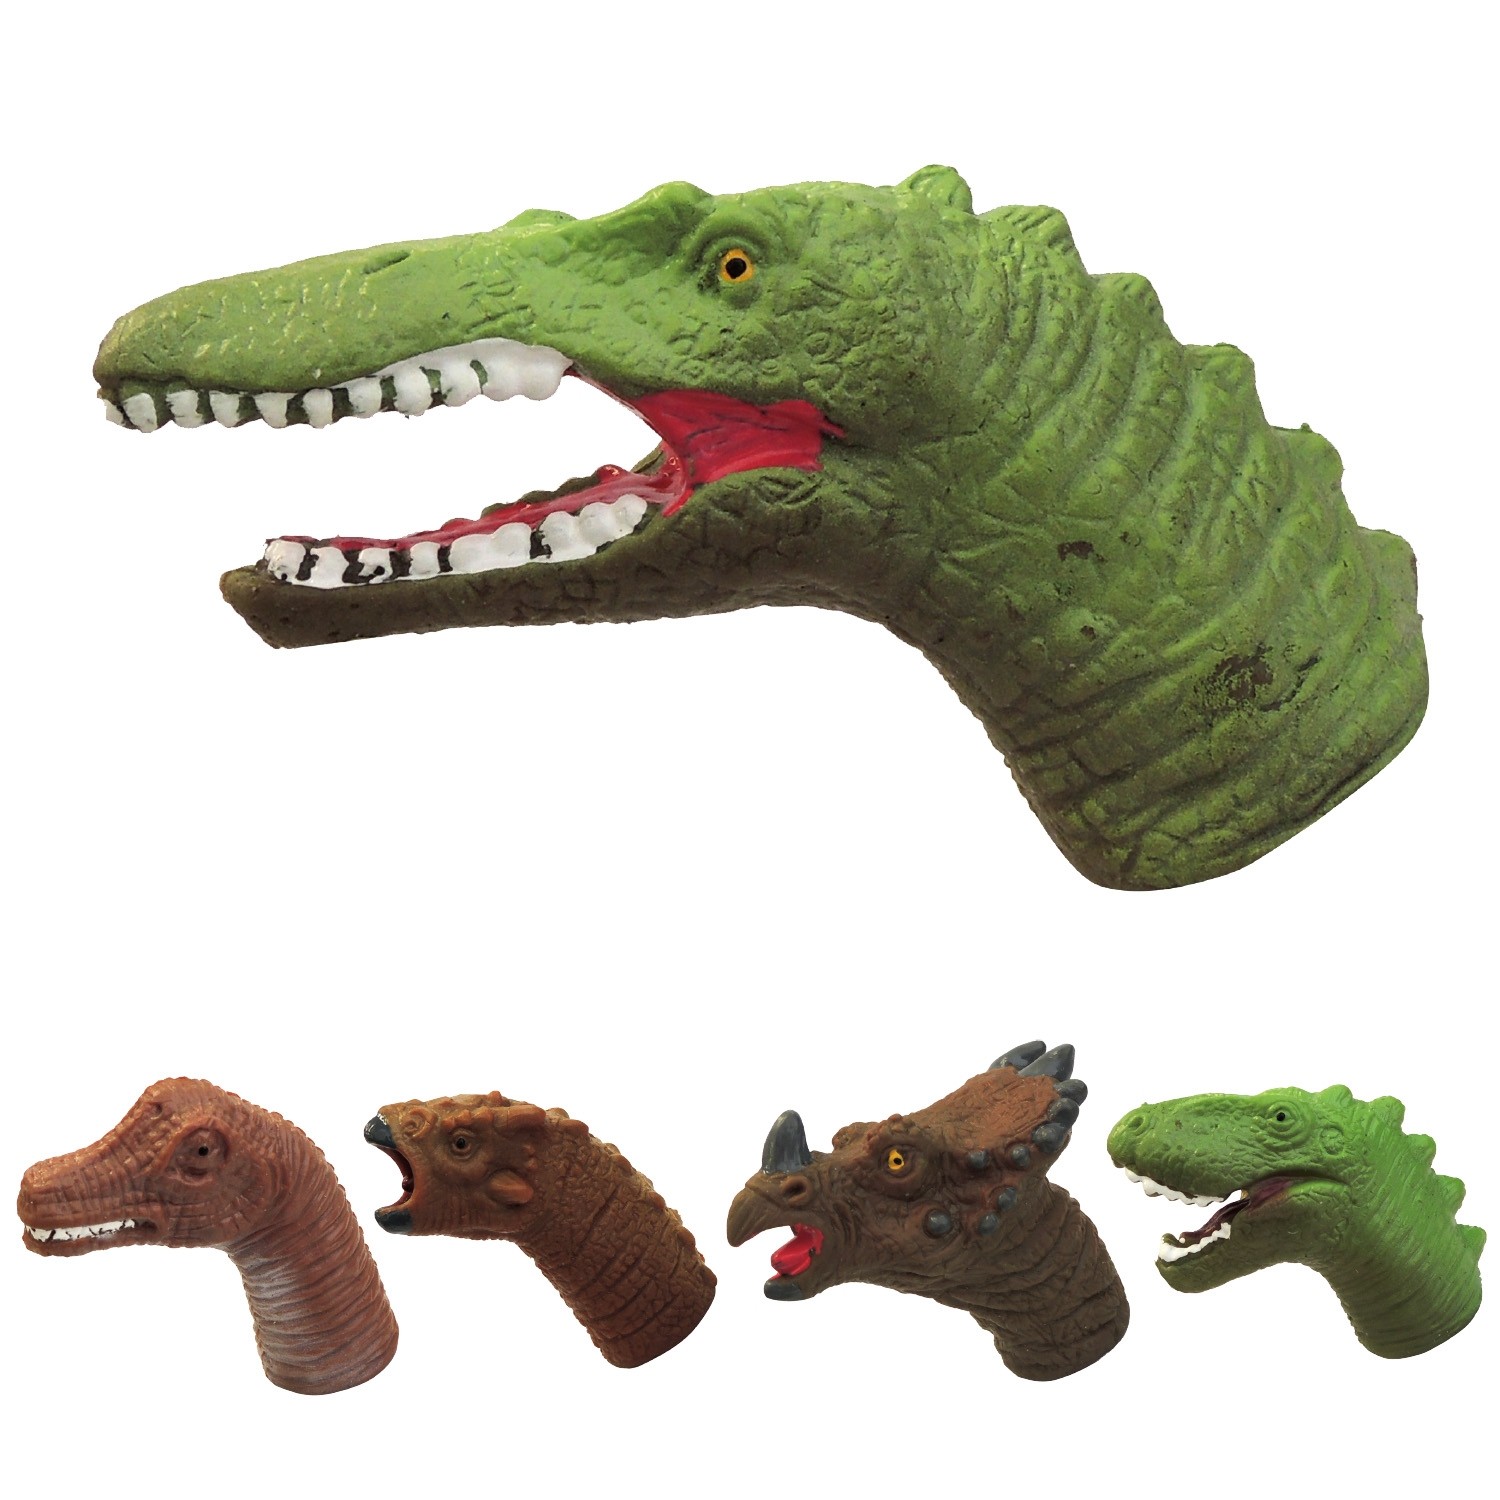 Dinosaur Finger Puppet - Boy's Toys - Products - Forever Shiny Limited,  specialize in small & vending toys